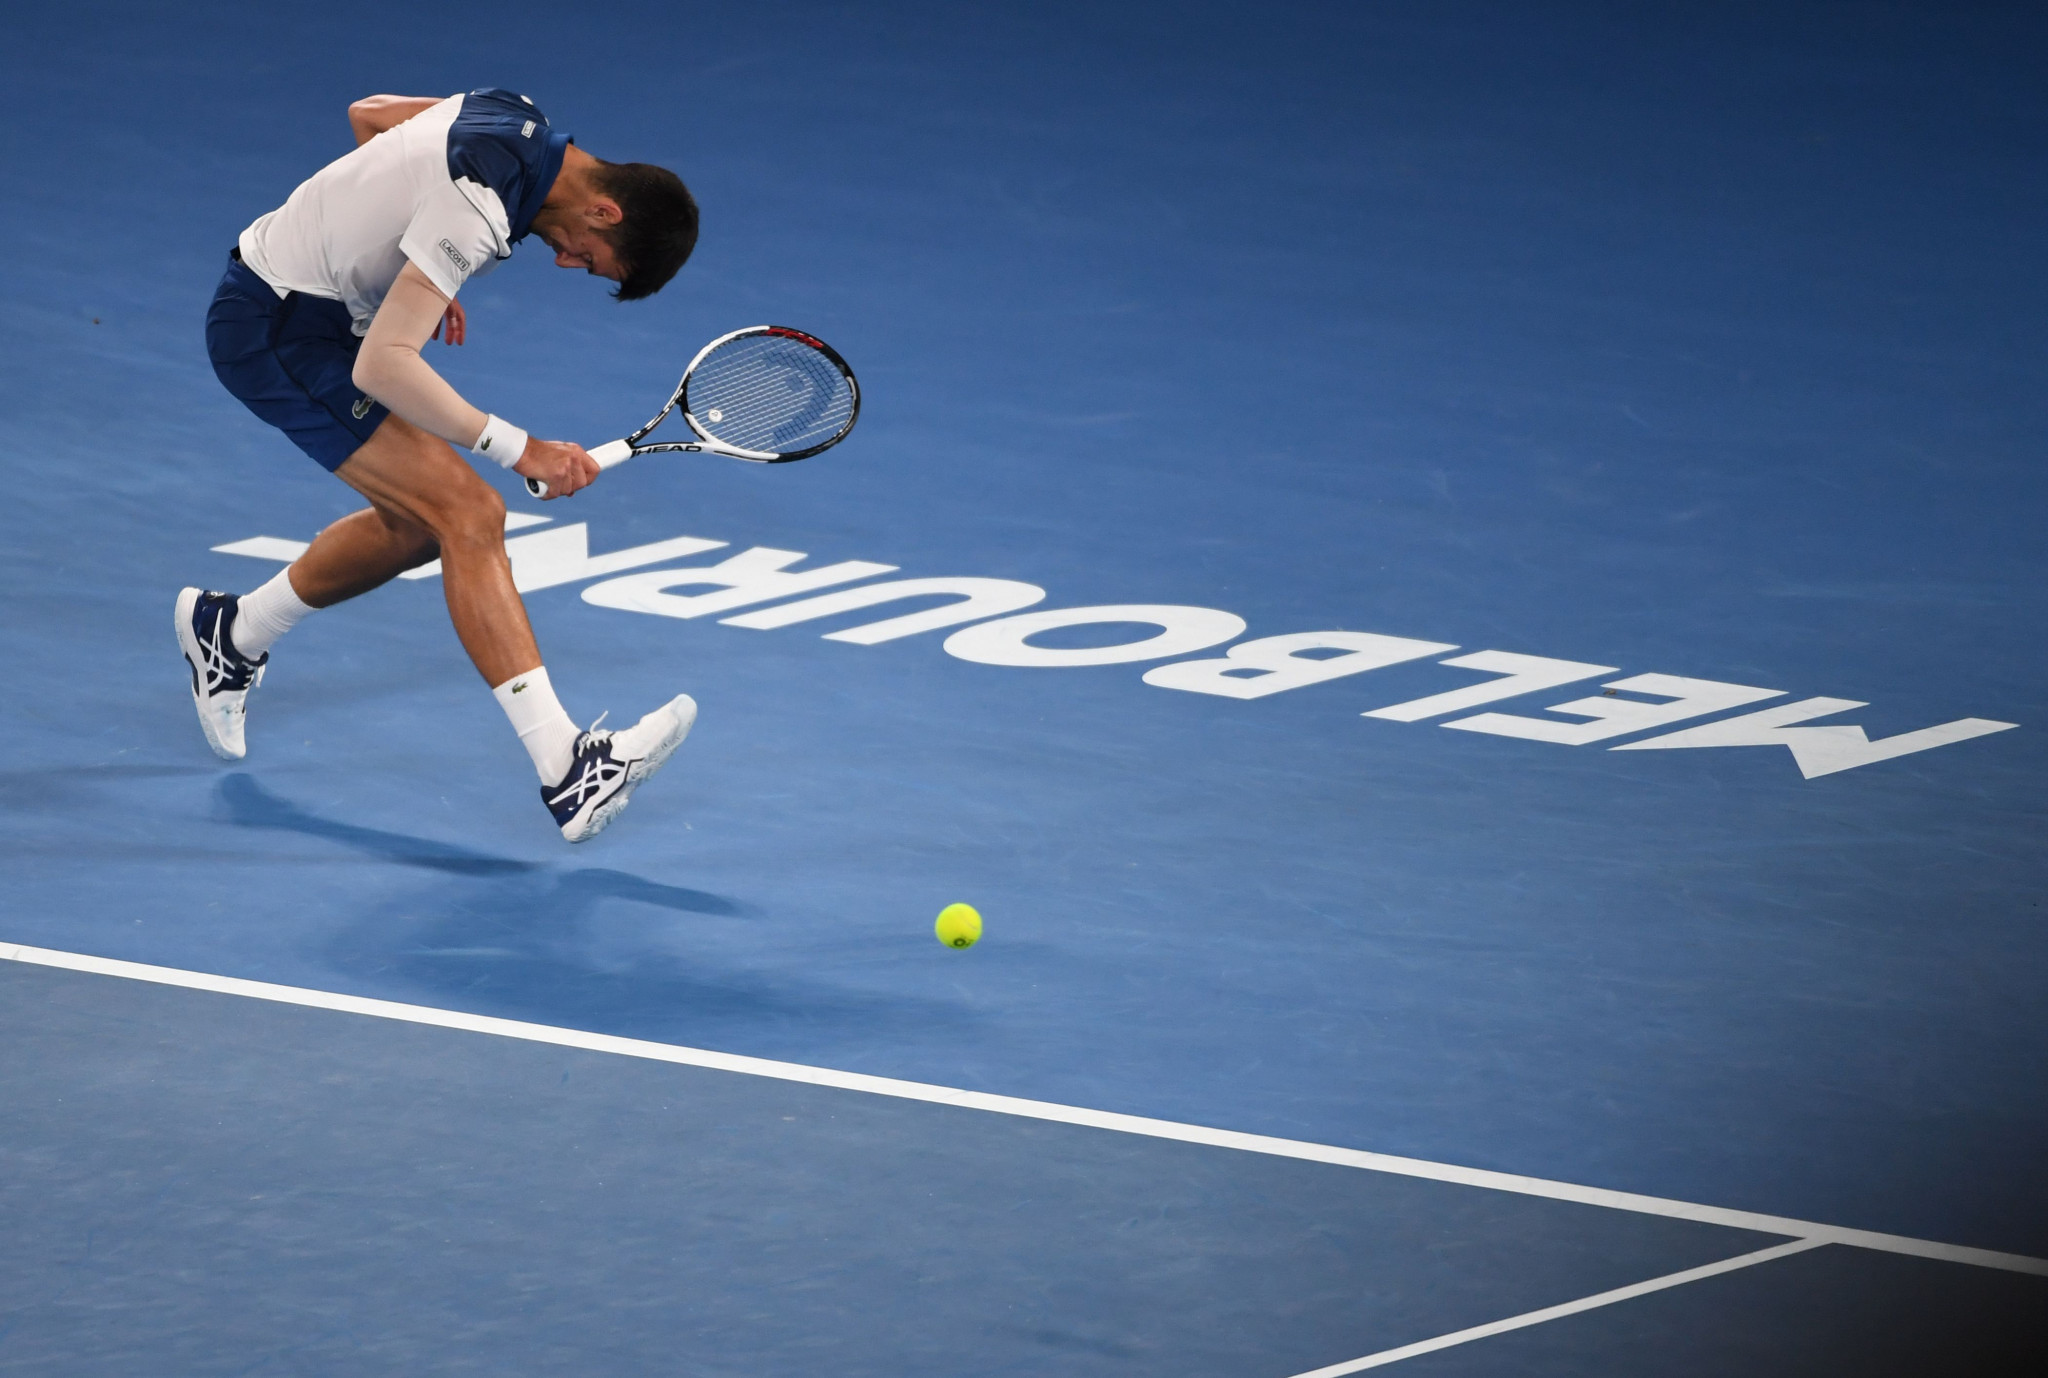 Novak Djokovic was beaten in straight sets to end his bid for a seventh Australian Open ©Getty Images